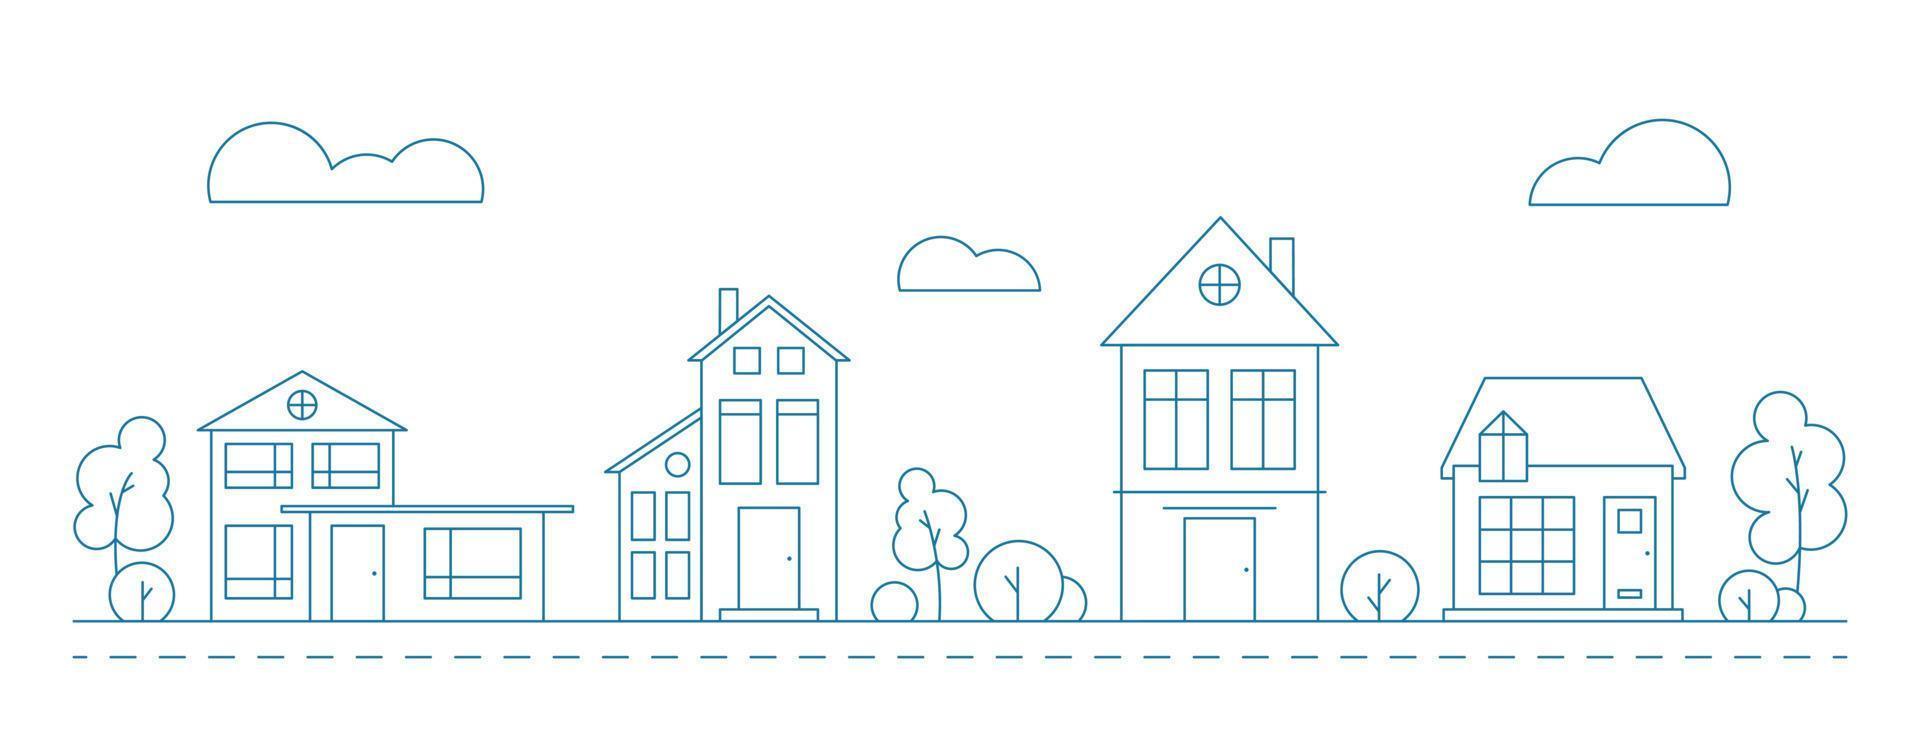 Neighborhood line art illustration with houses. Cityscape with blue residential buildings. vector